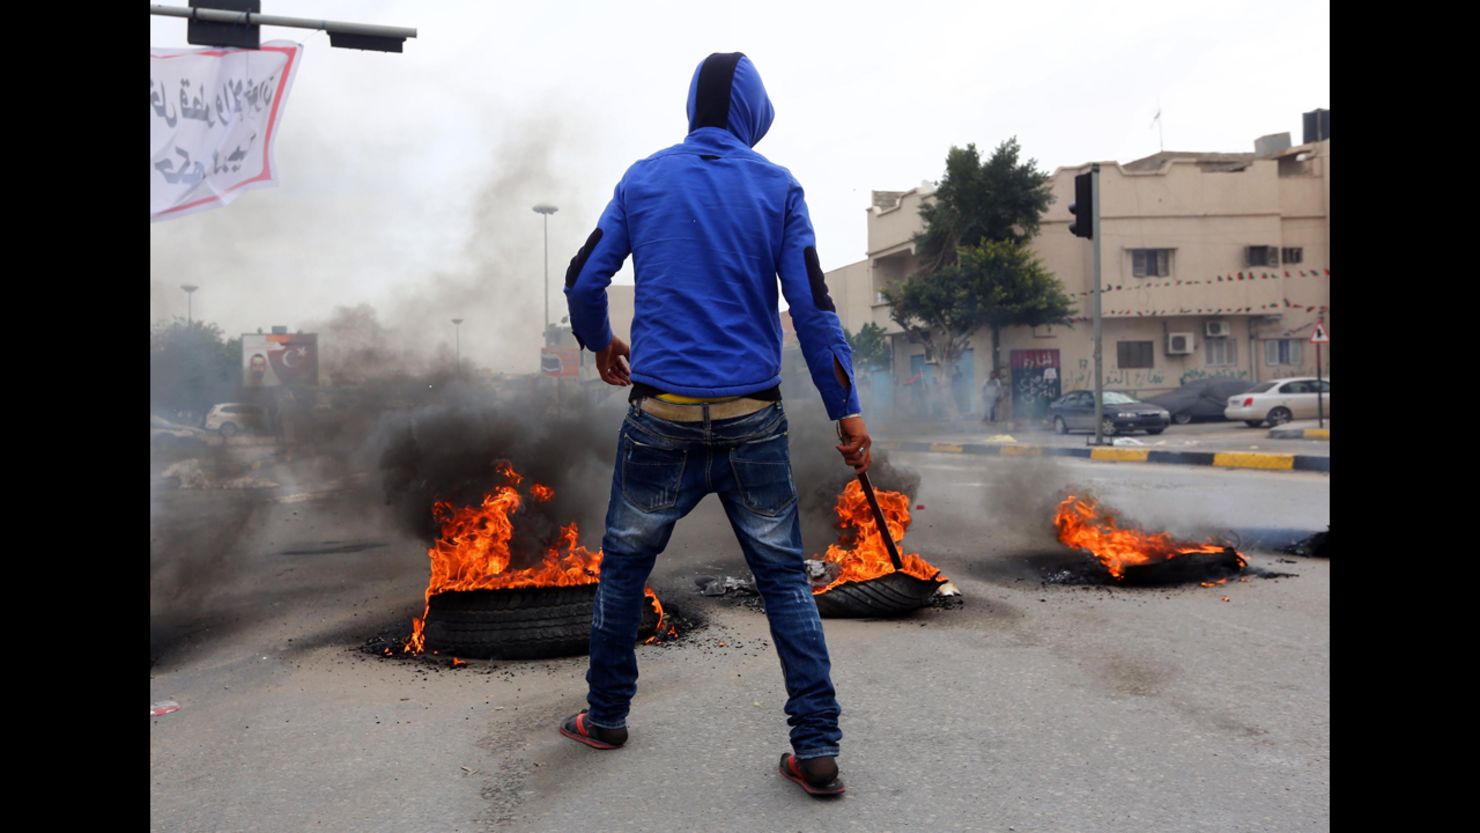 A protester sets tires on fire outside of the Libyan General National Congress in Tripoli on Sunday.